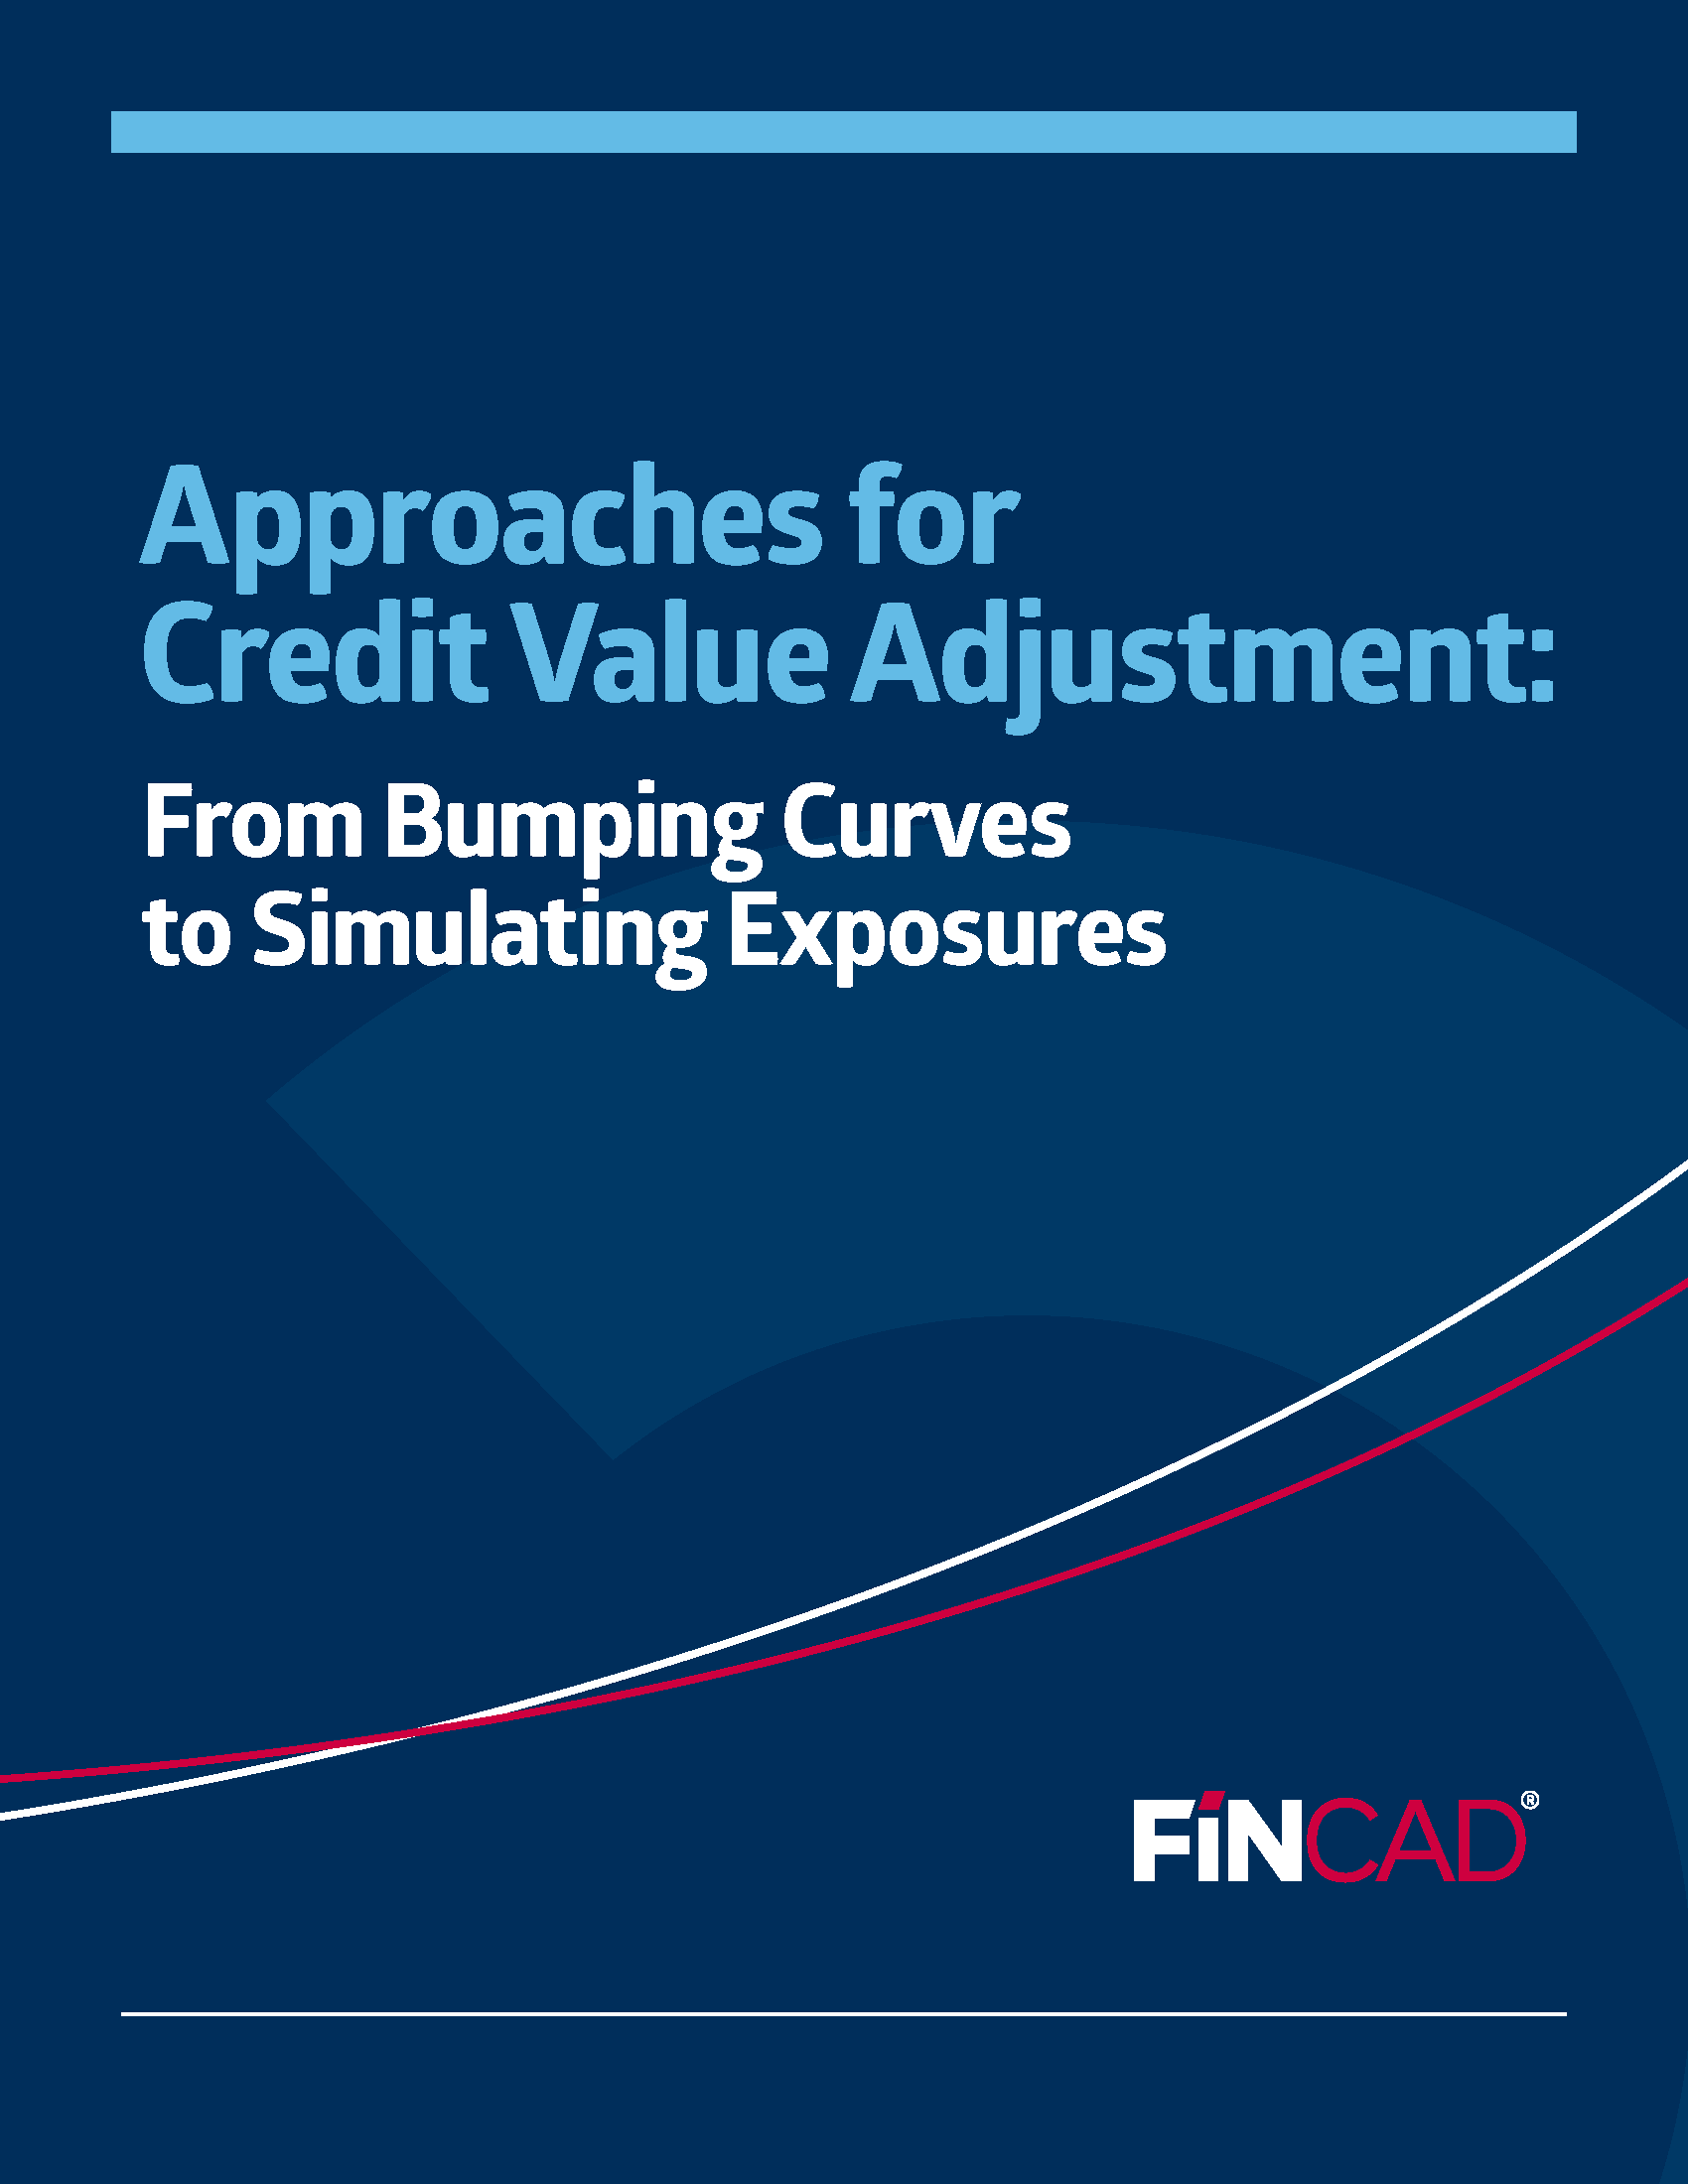 Approaches for Credit Value Adjustment: From Bumping Curves to Simulating Exposures